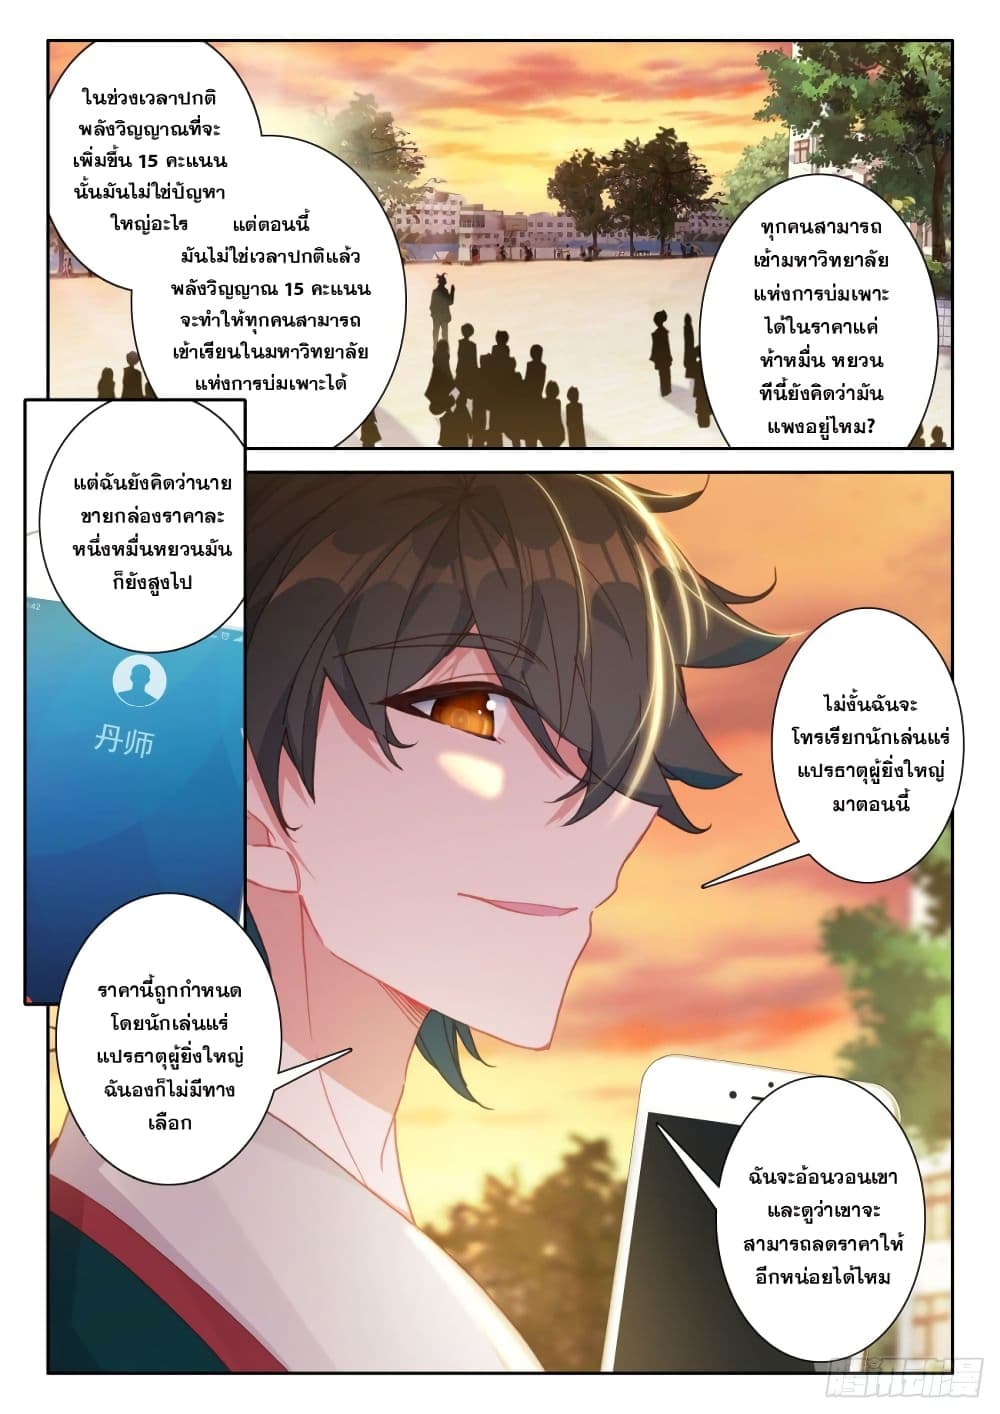 Becoming Immortal by Paying Cash ตอนที่ 5 (6)